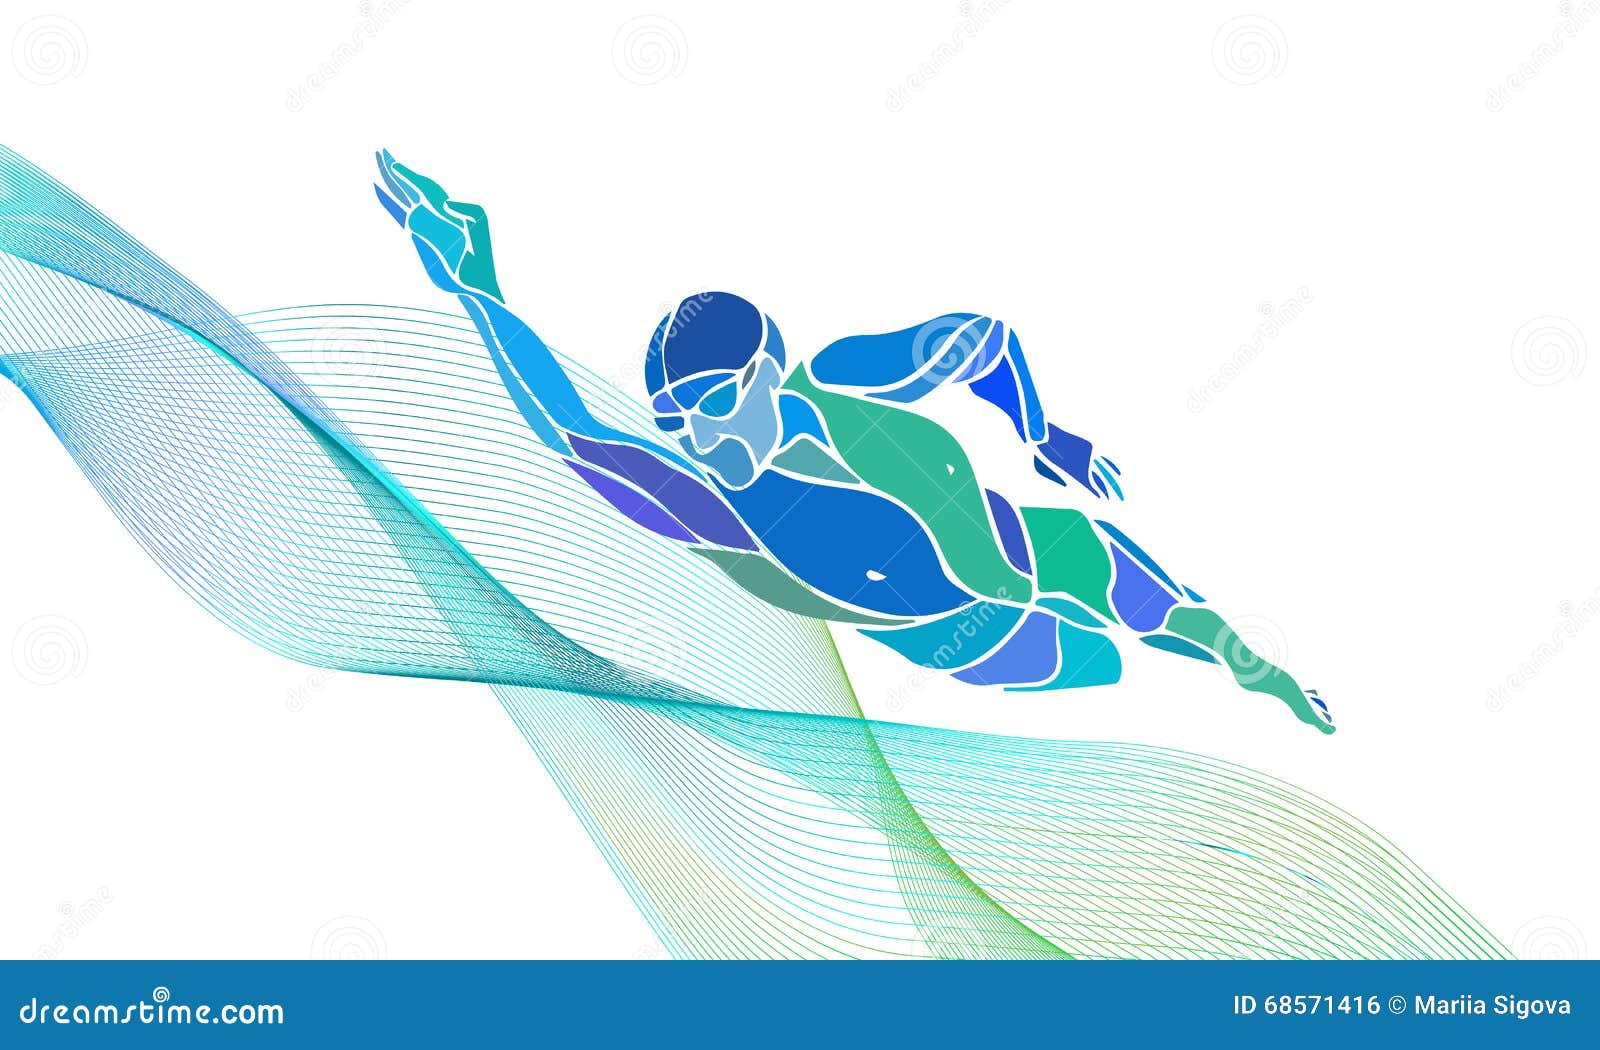 freestyle swimmer silhouette. sport swimming